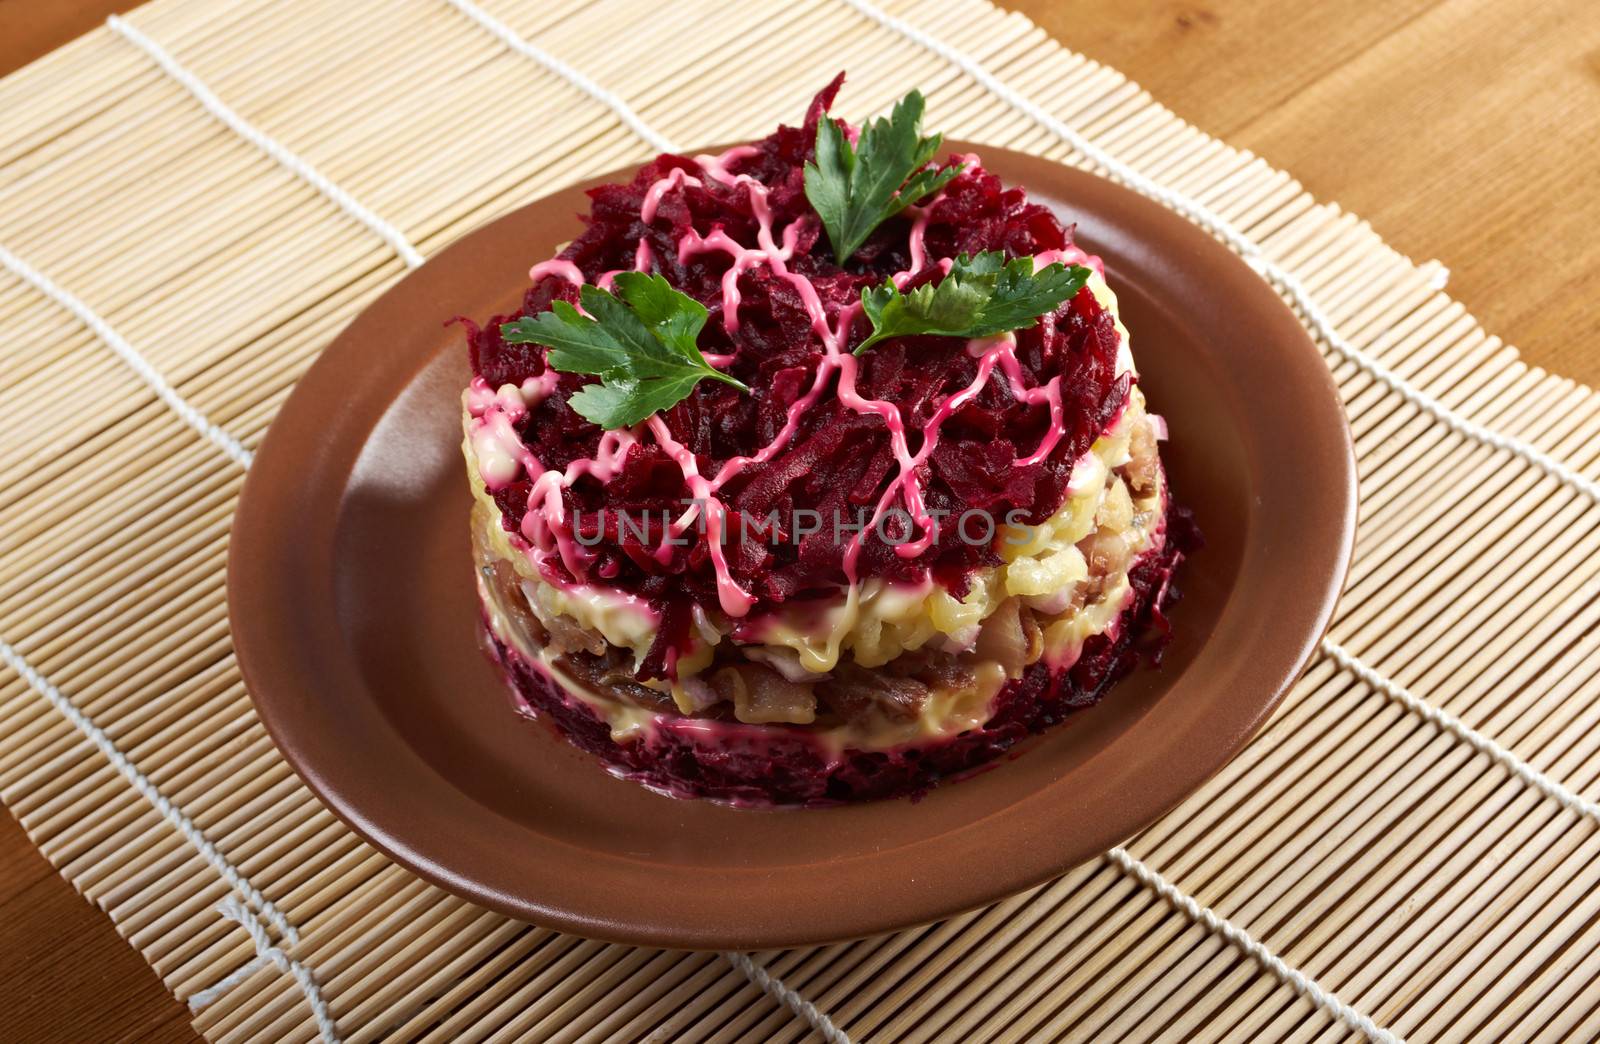 traditional russian salad with salted herring and beet -Selyodka Pod Shuboy (Dressed Herring)
